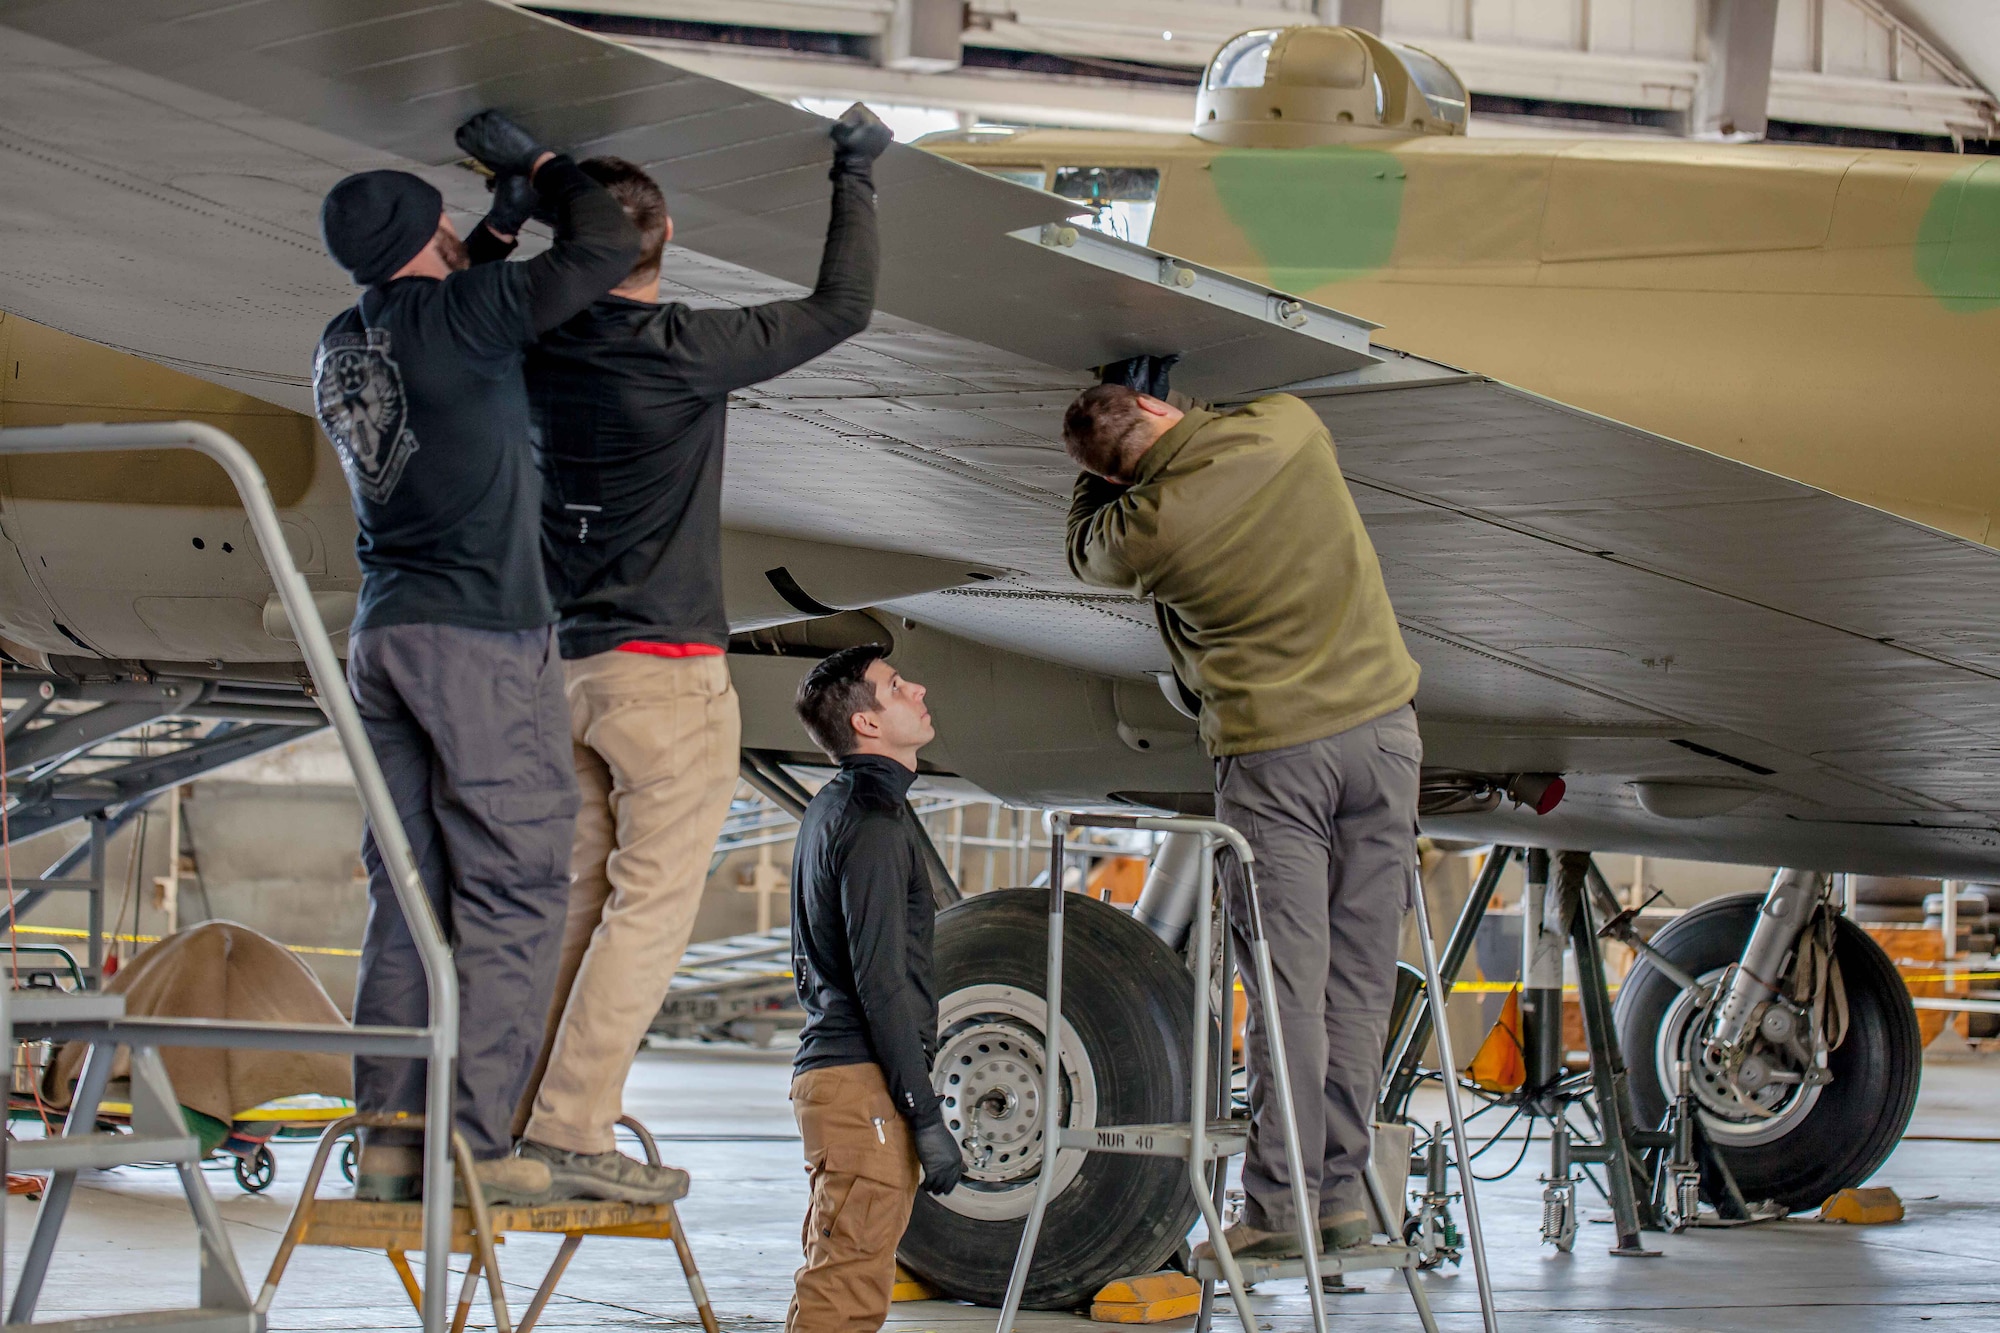 DAYTON, Ohio (01/04/2018) -- National Museum of the U.S. Air Force restoration crews installing the final control surfaces on the Boeing B-17F Memphis Belle™. Plans call for the aircraft to be placed on permanent public display in the WWII Gallery here at the National Museum of the U.S. Air Force on May 17, 2018. (U.S. Air Force photo by Ernie Muller)